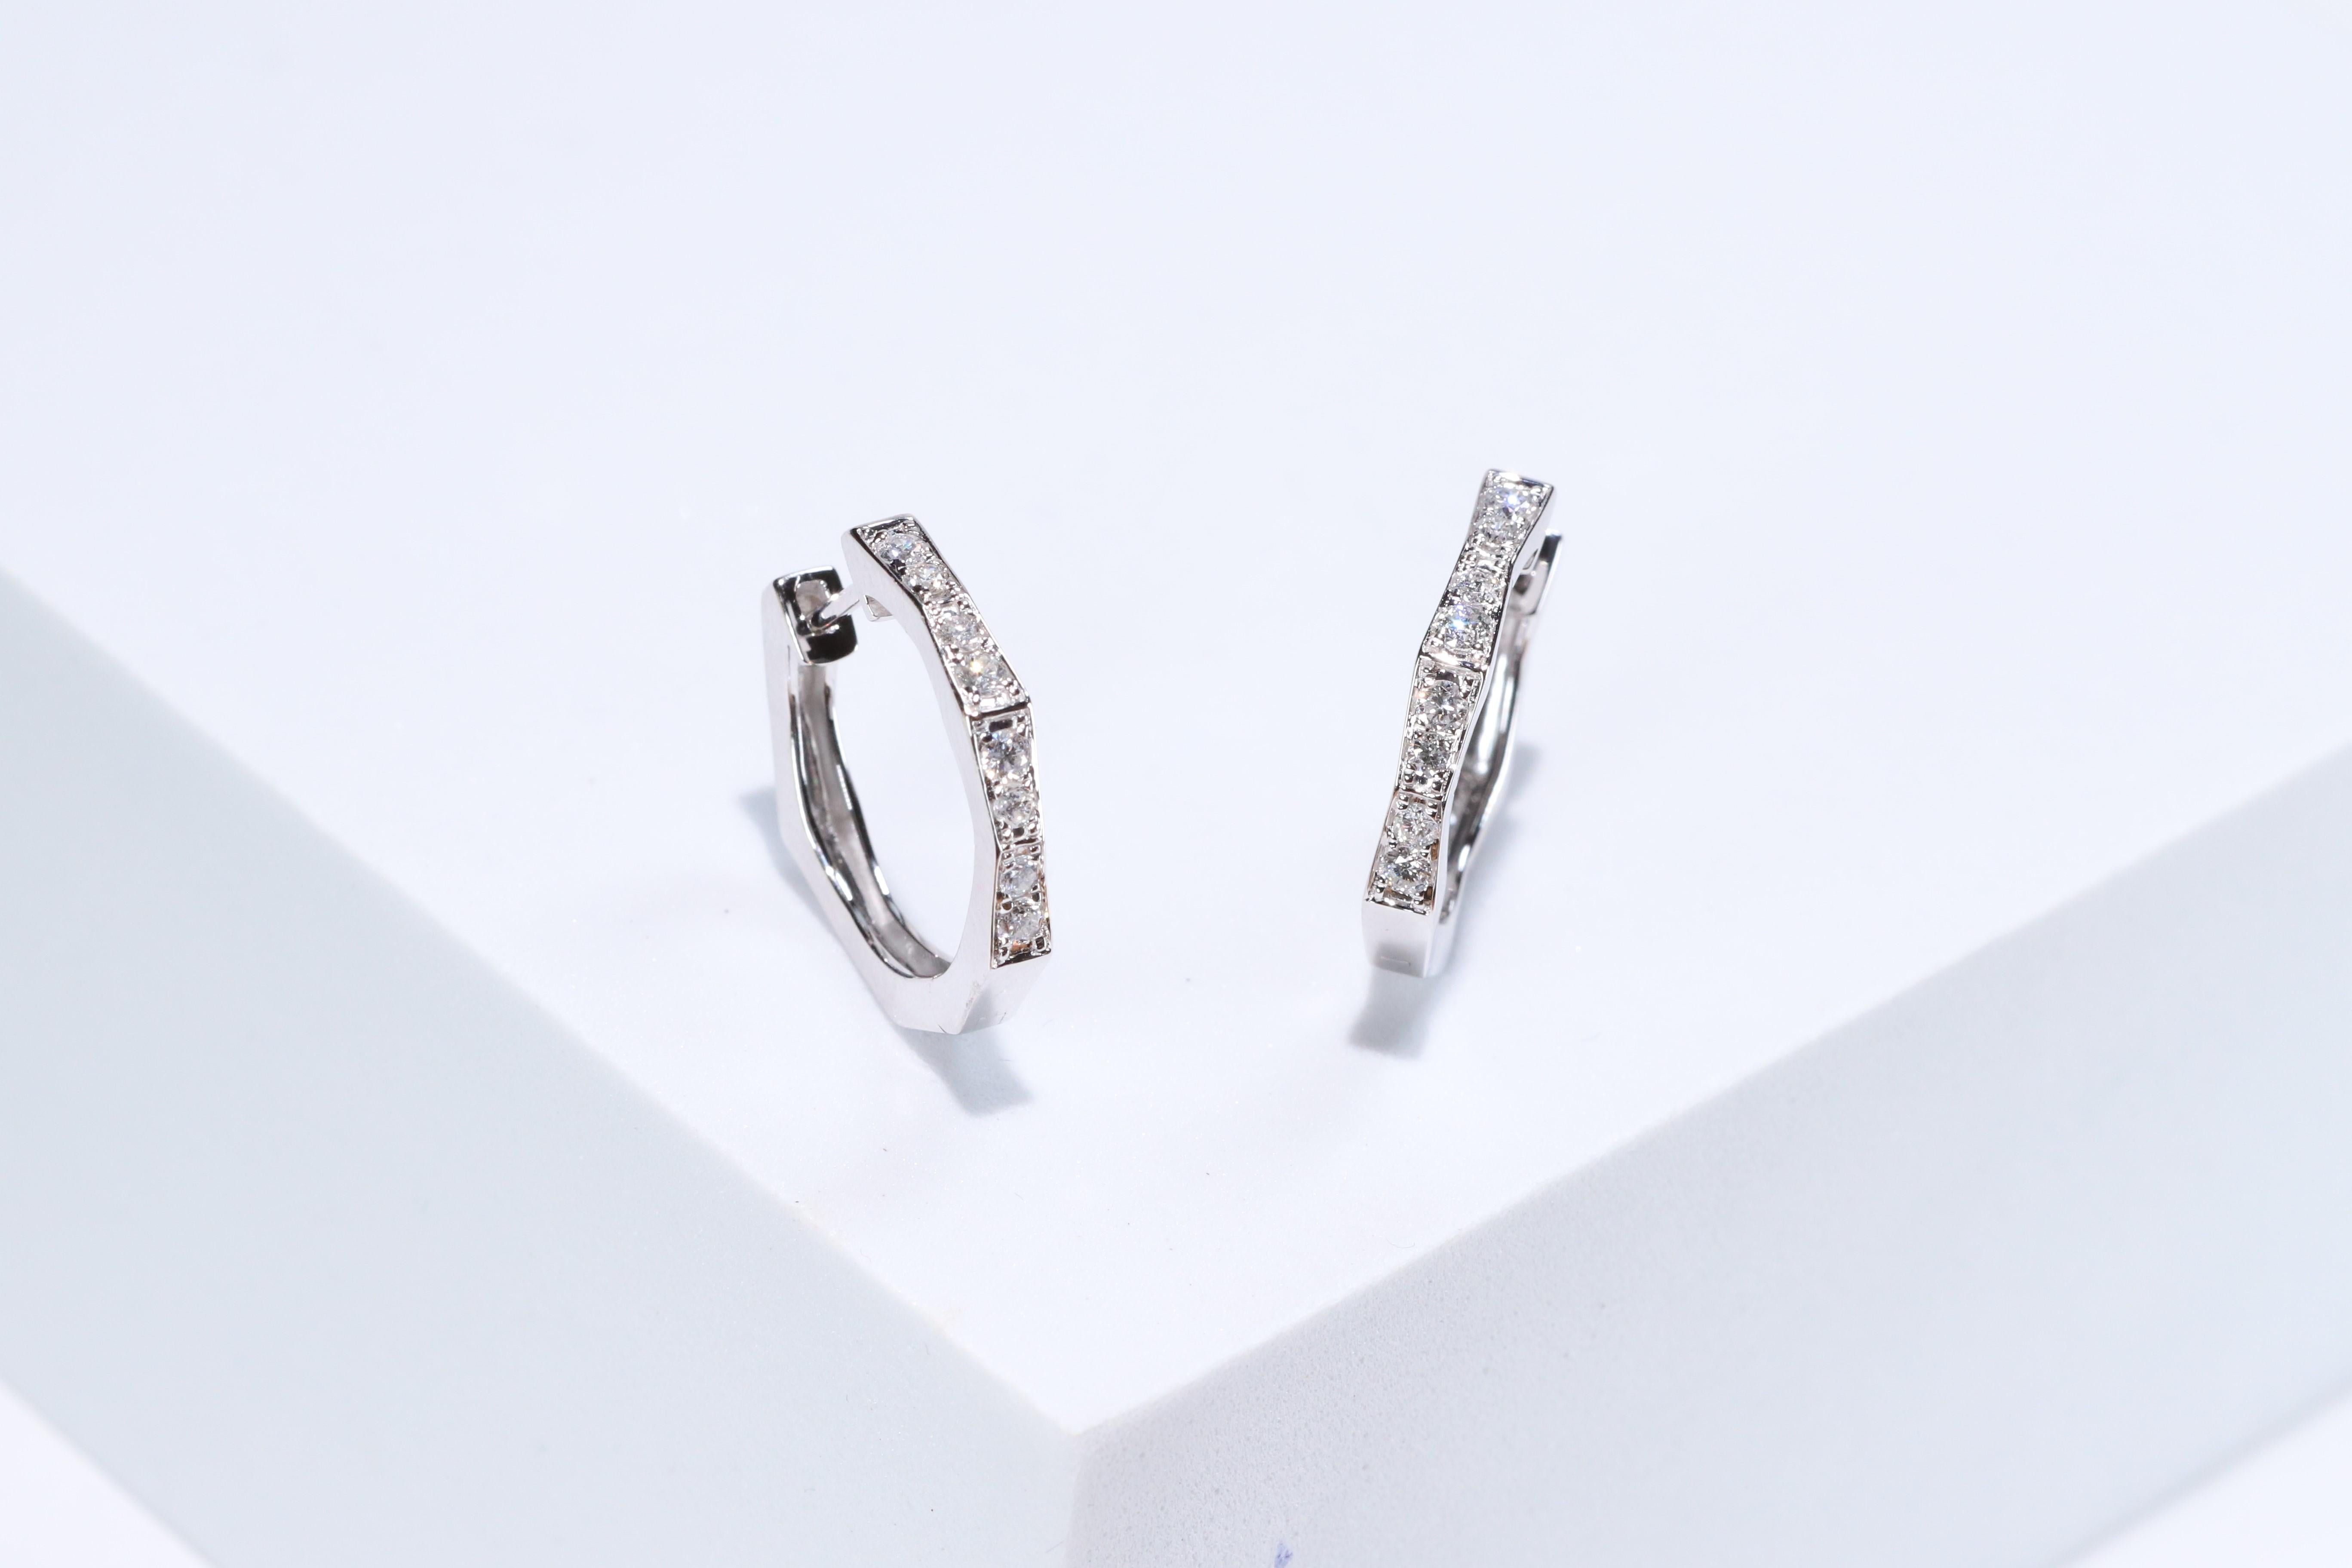 Each of these pretty earrings from Gin & Grace features a on a lever back clasp adorned with white diamonds. These earrings are made of rich 14-karat White gold with a high polish. Diamonds: 16 pcs Diamond cut: Round Diamond weight: 0.34 carat